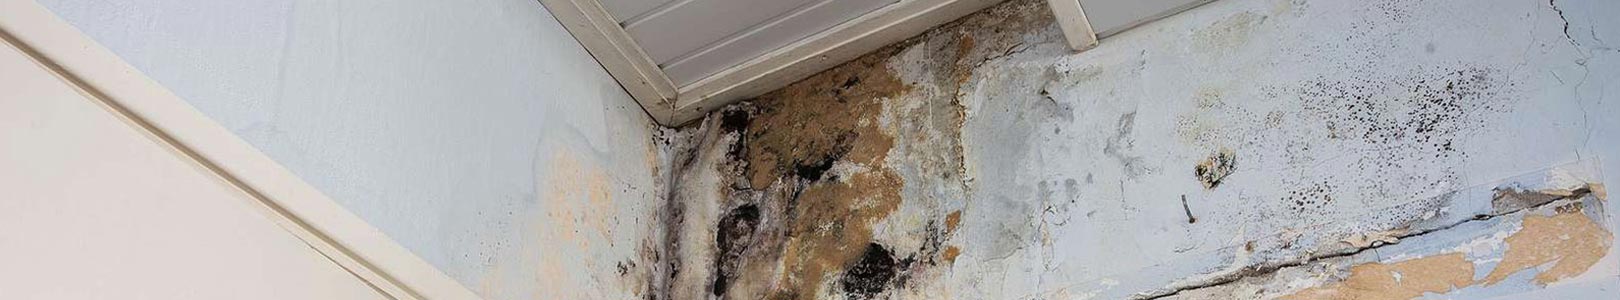 How Fast Does Mold Grow And Become A Problem?